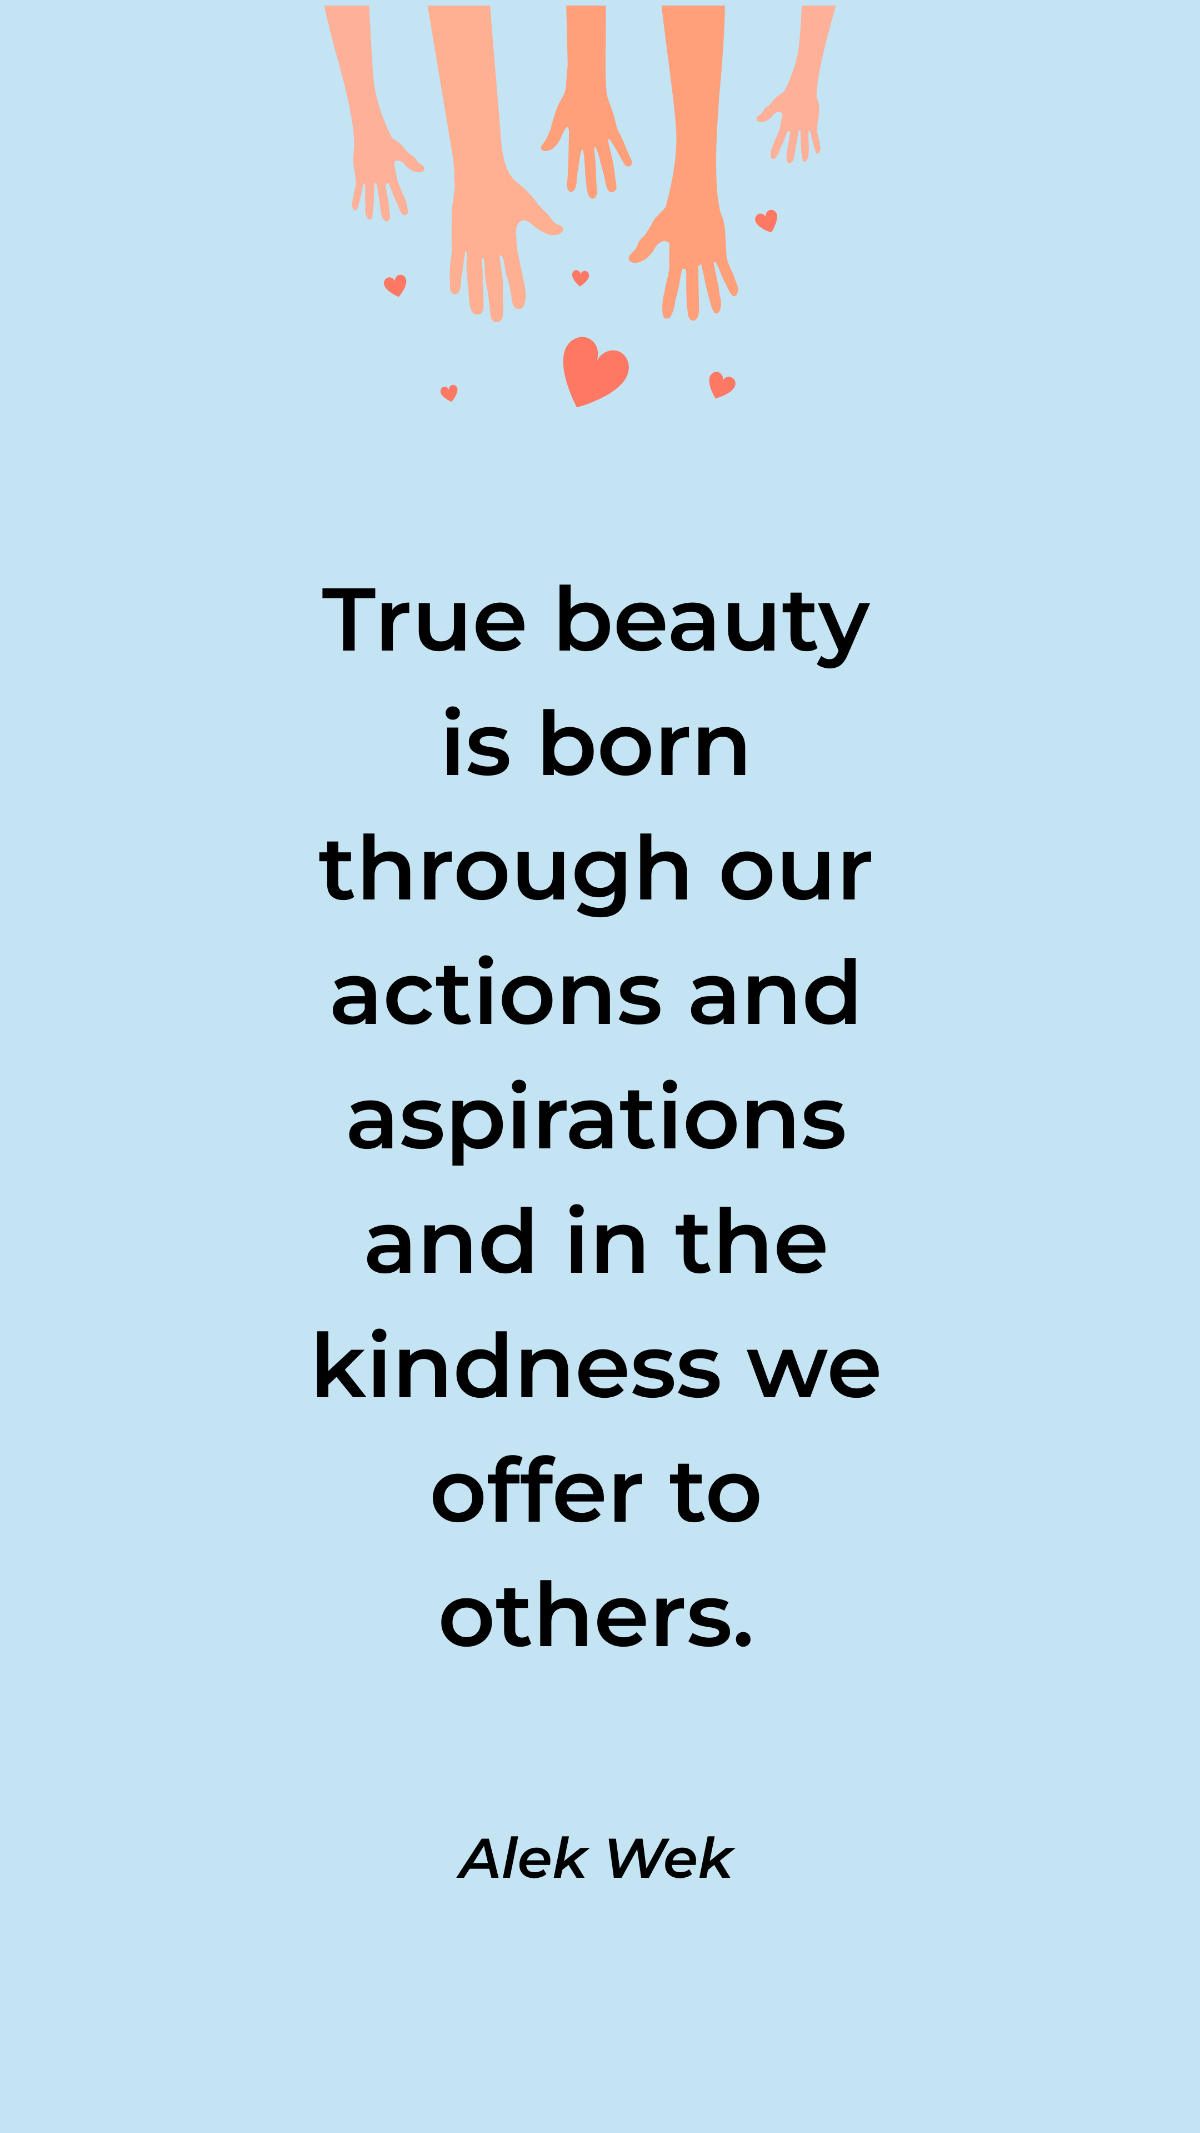 Free Alek Wek - True beauty is born through our actions and aspirations and in the kindness we offer to others. Template